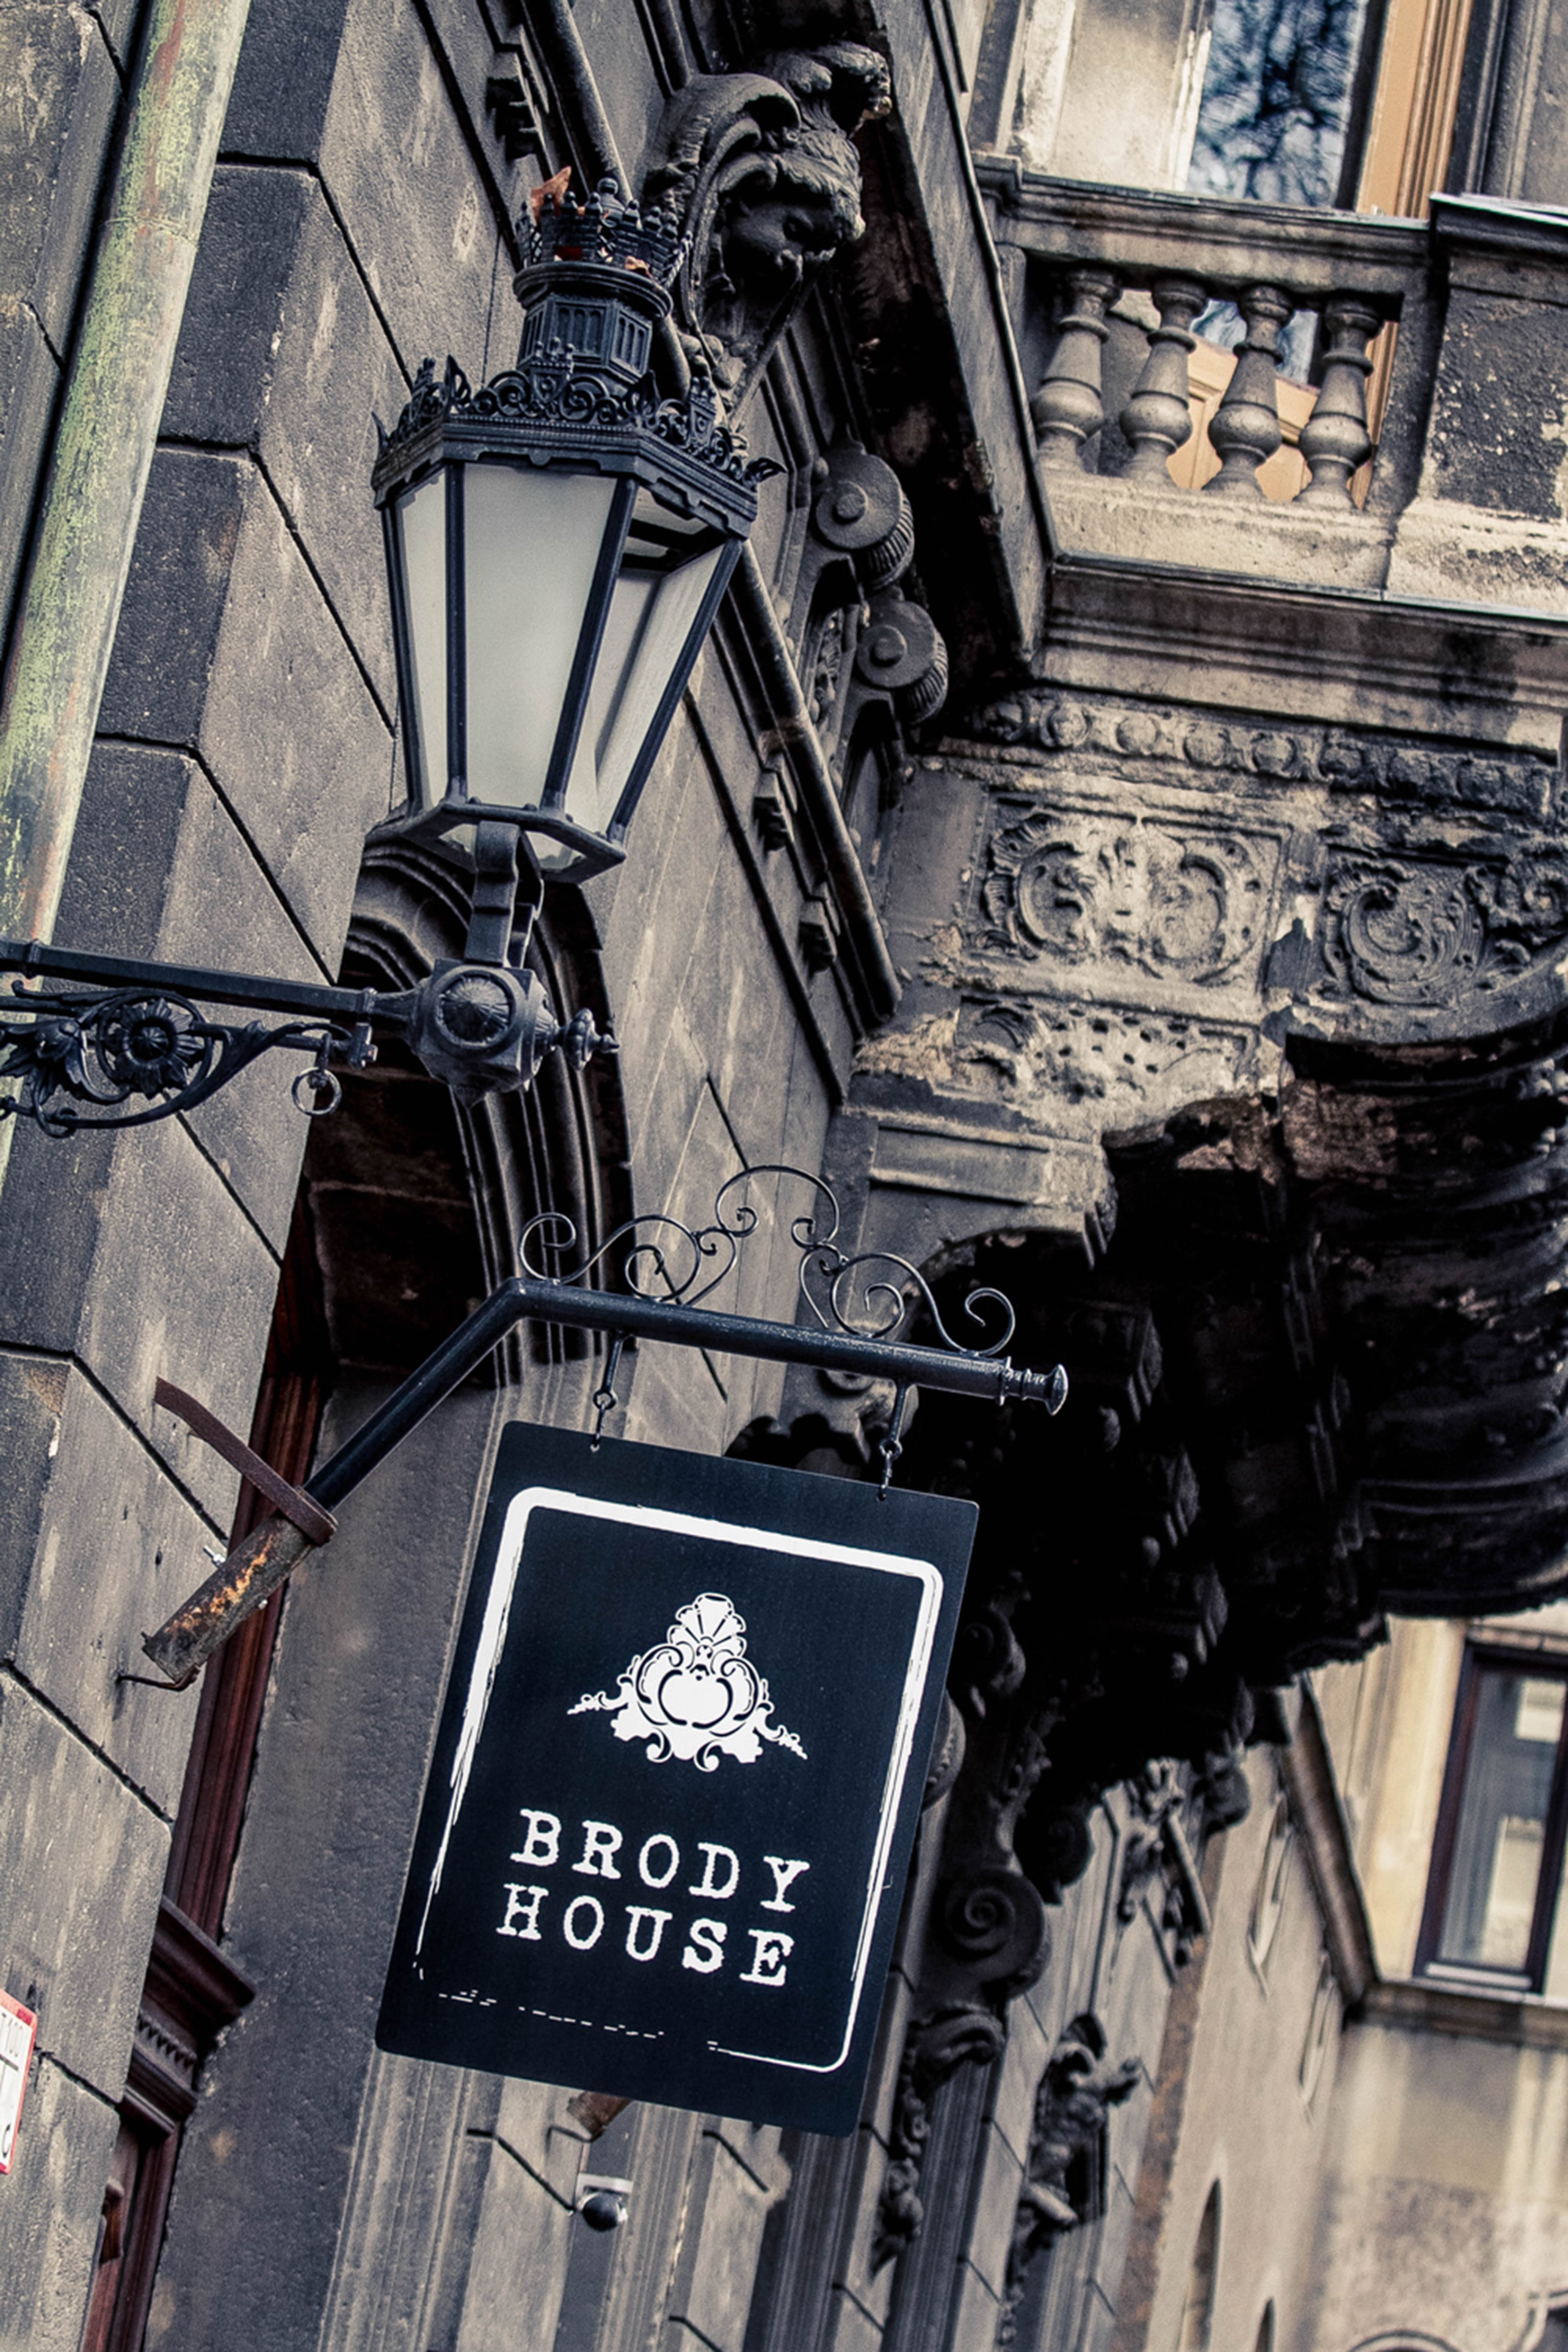 Brody House Budapest: Brody Villa, Apartments, Studios and ArtYard